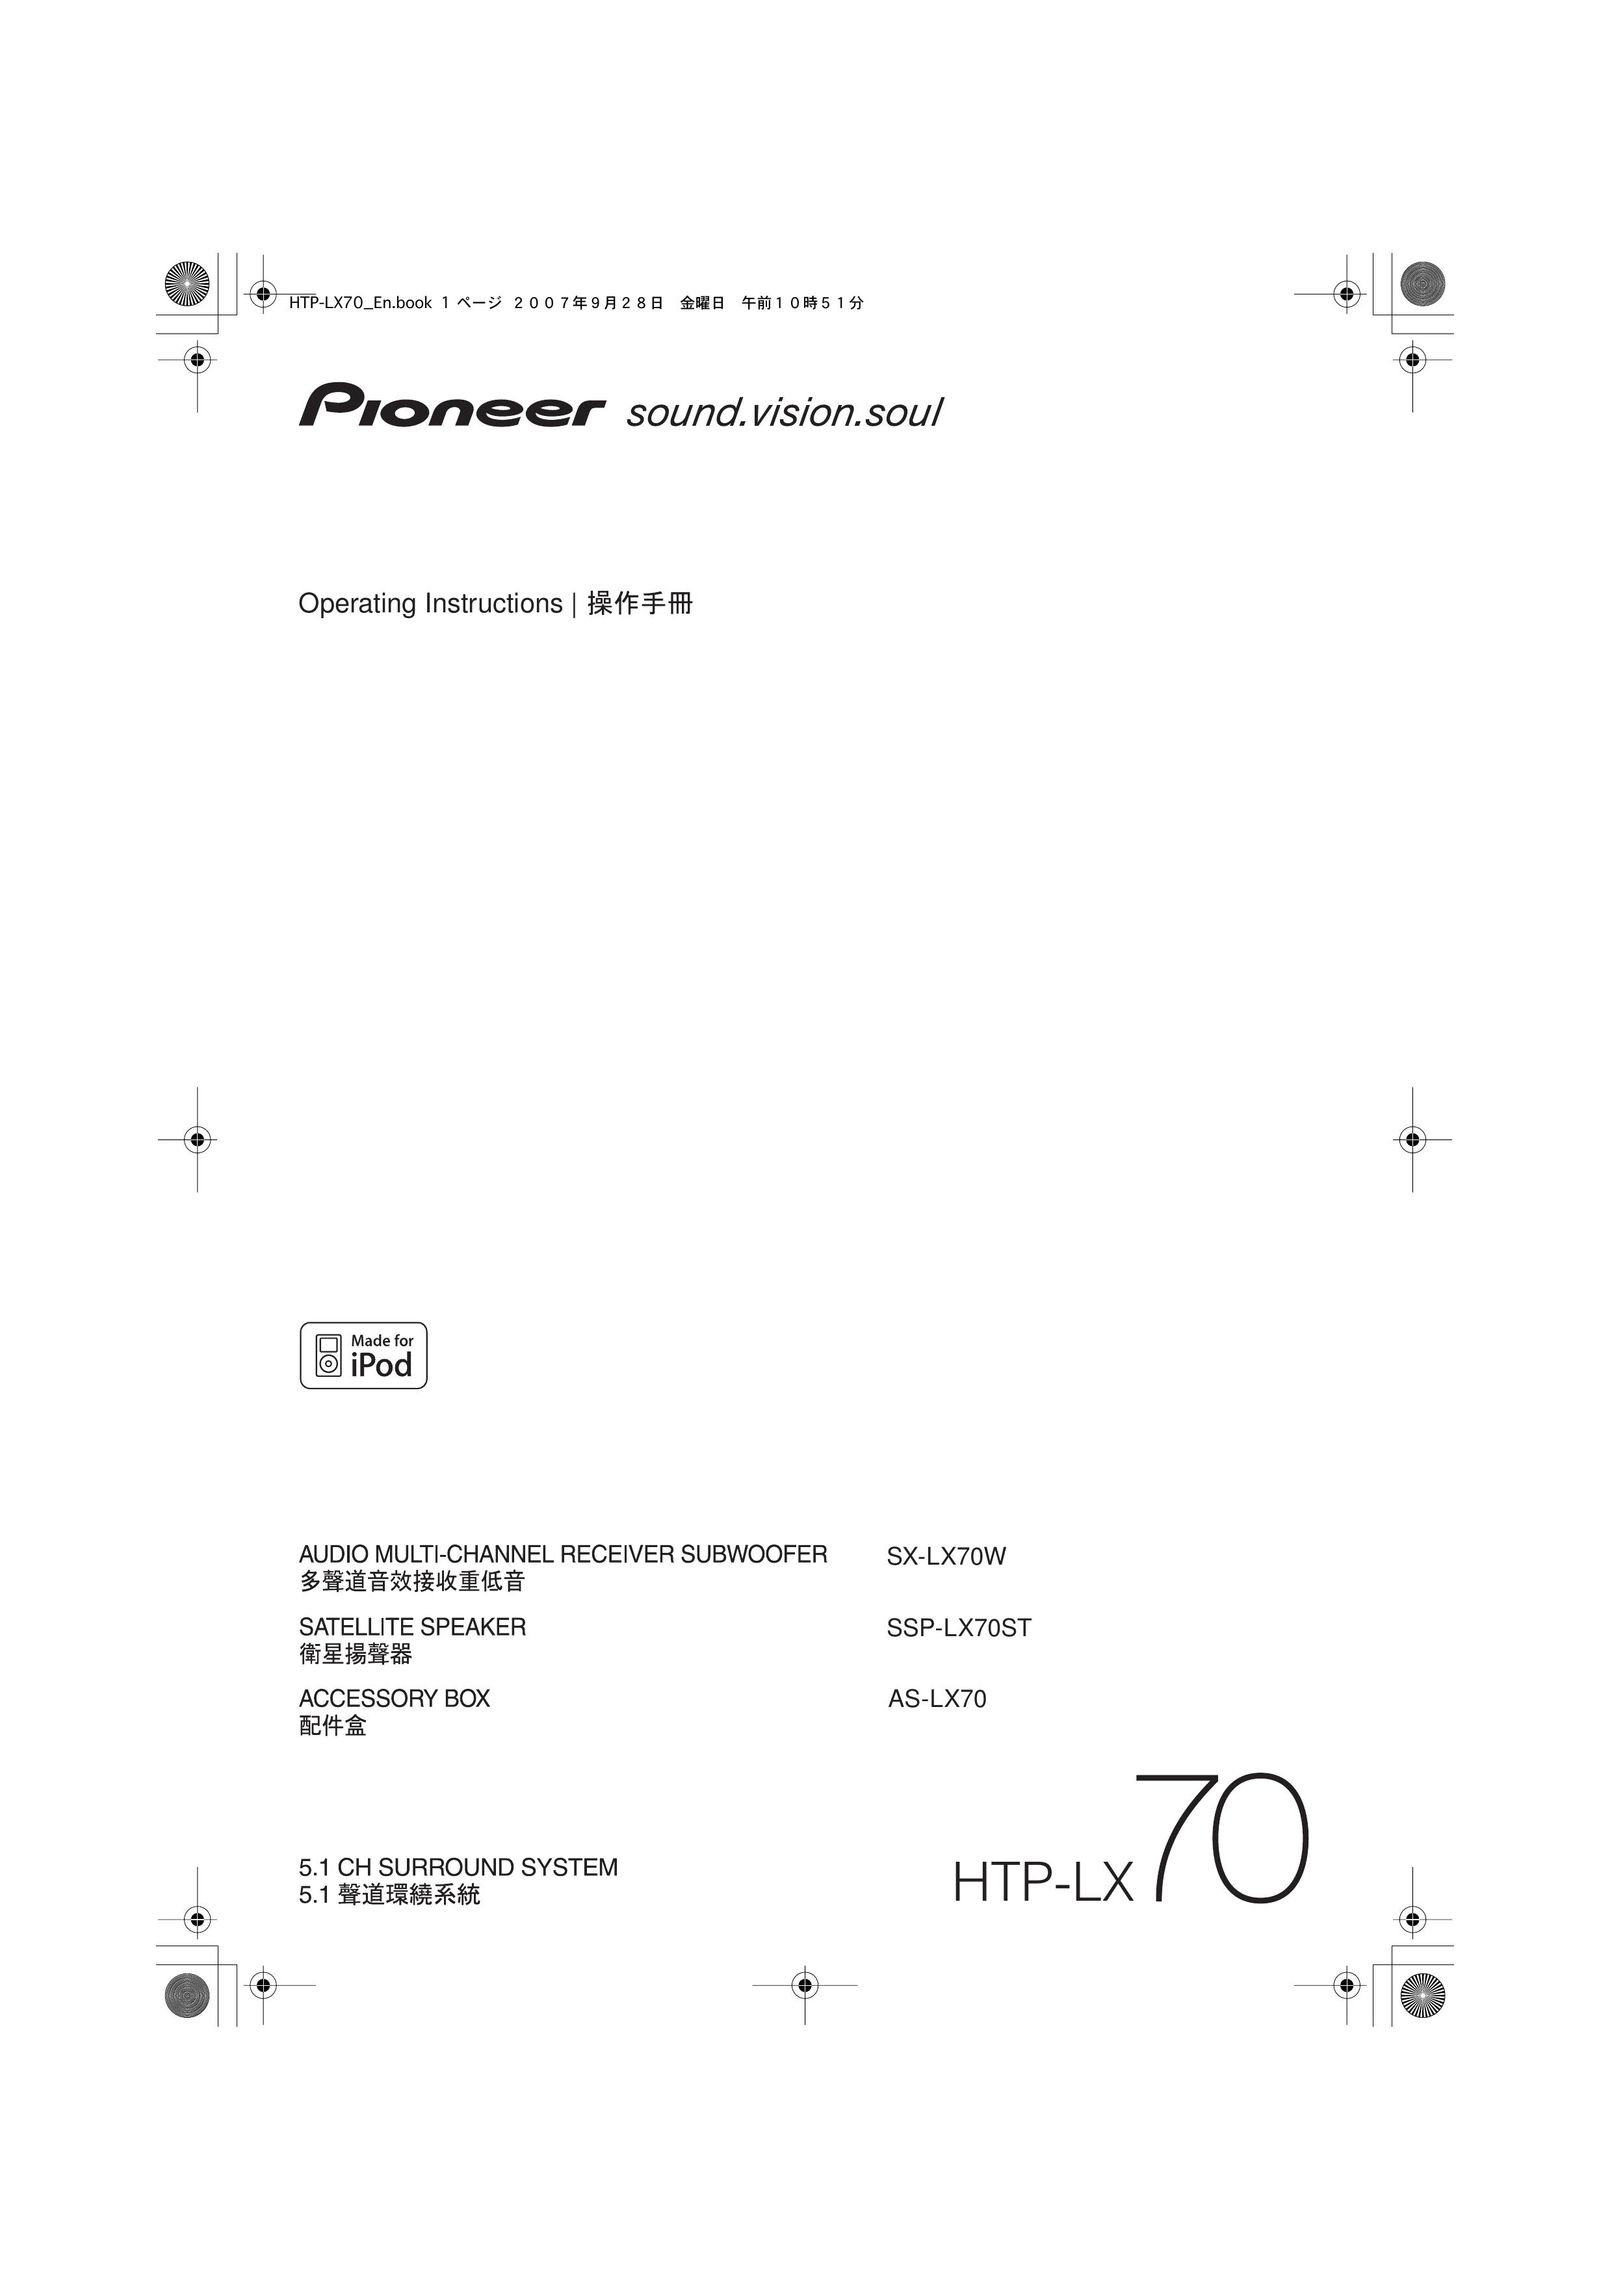 Pioneer HTP-LX70 Home Theater System User Manual